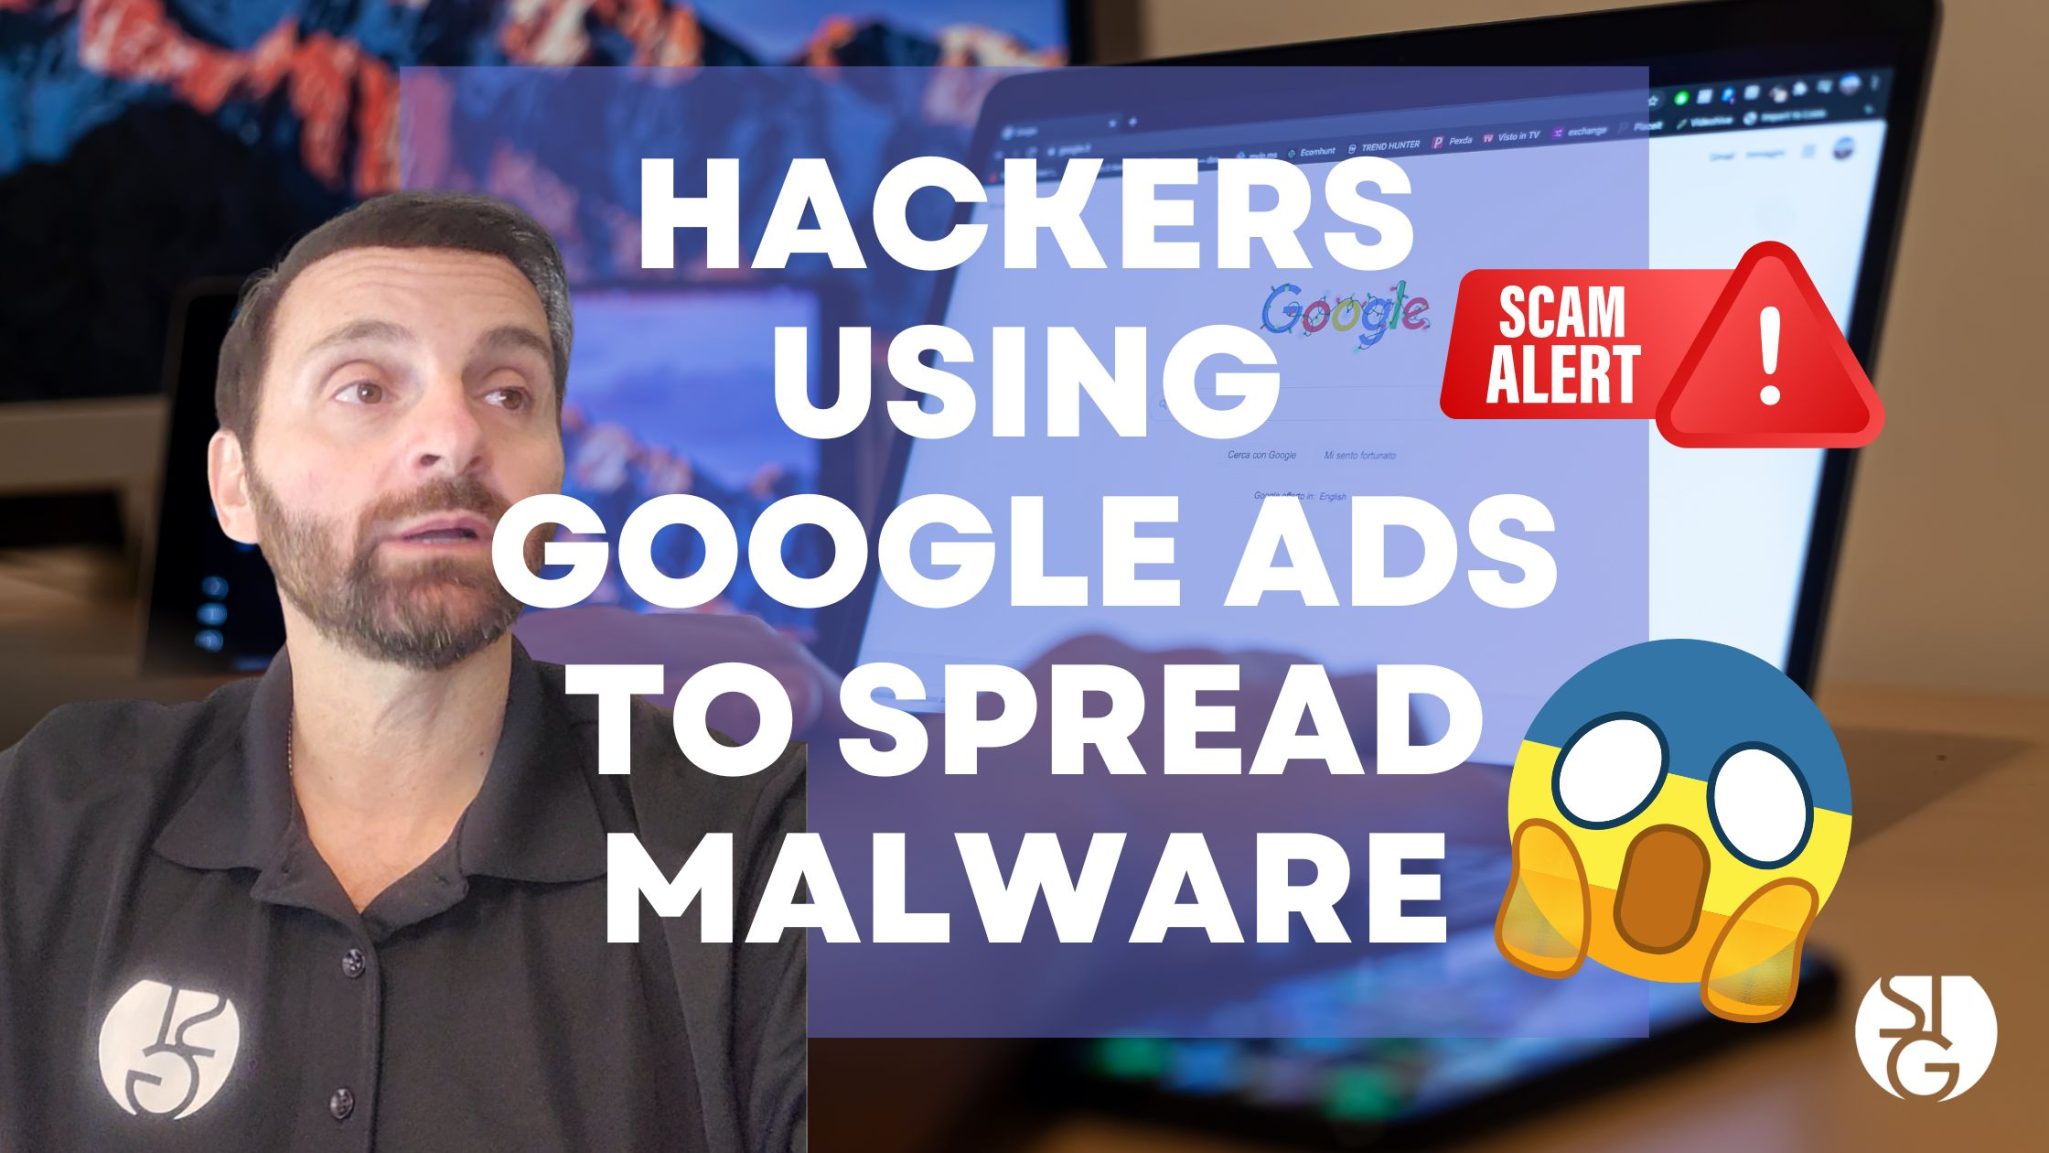 Hackers Use Google Ads to Spread Malware